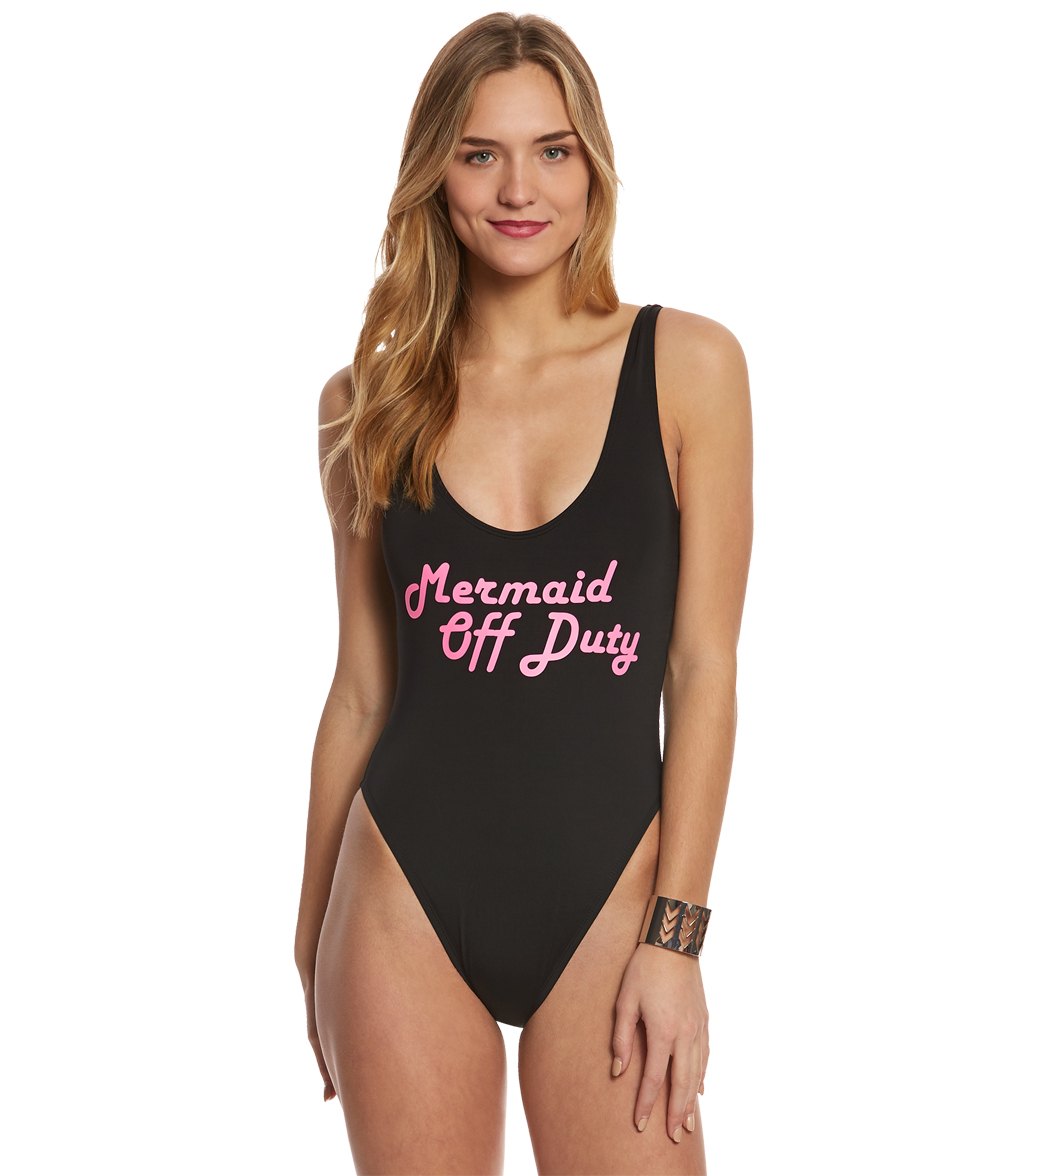 swimoutlet swimsuits